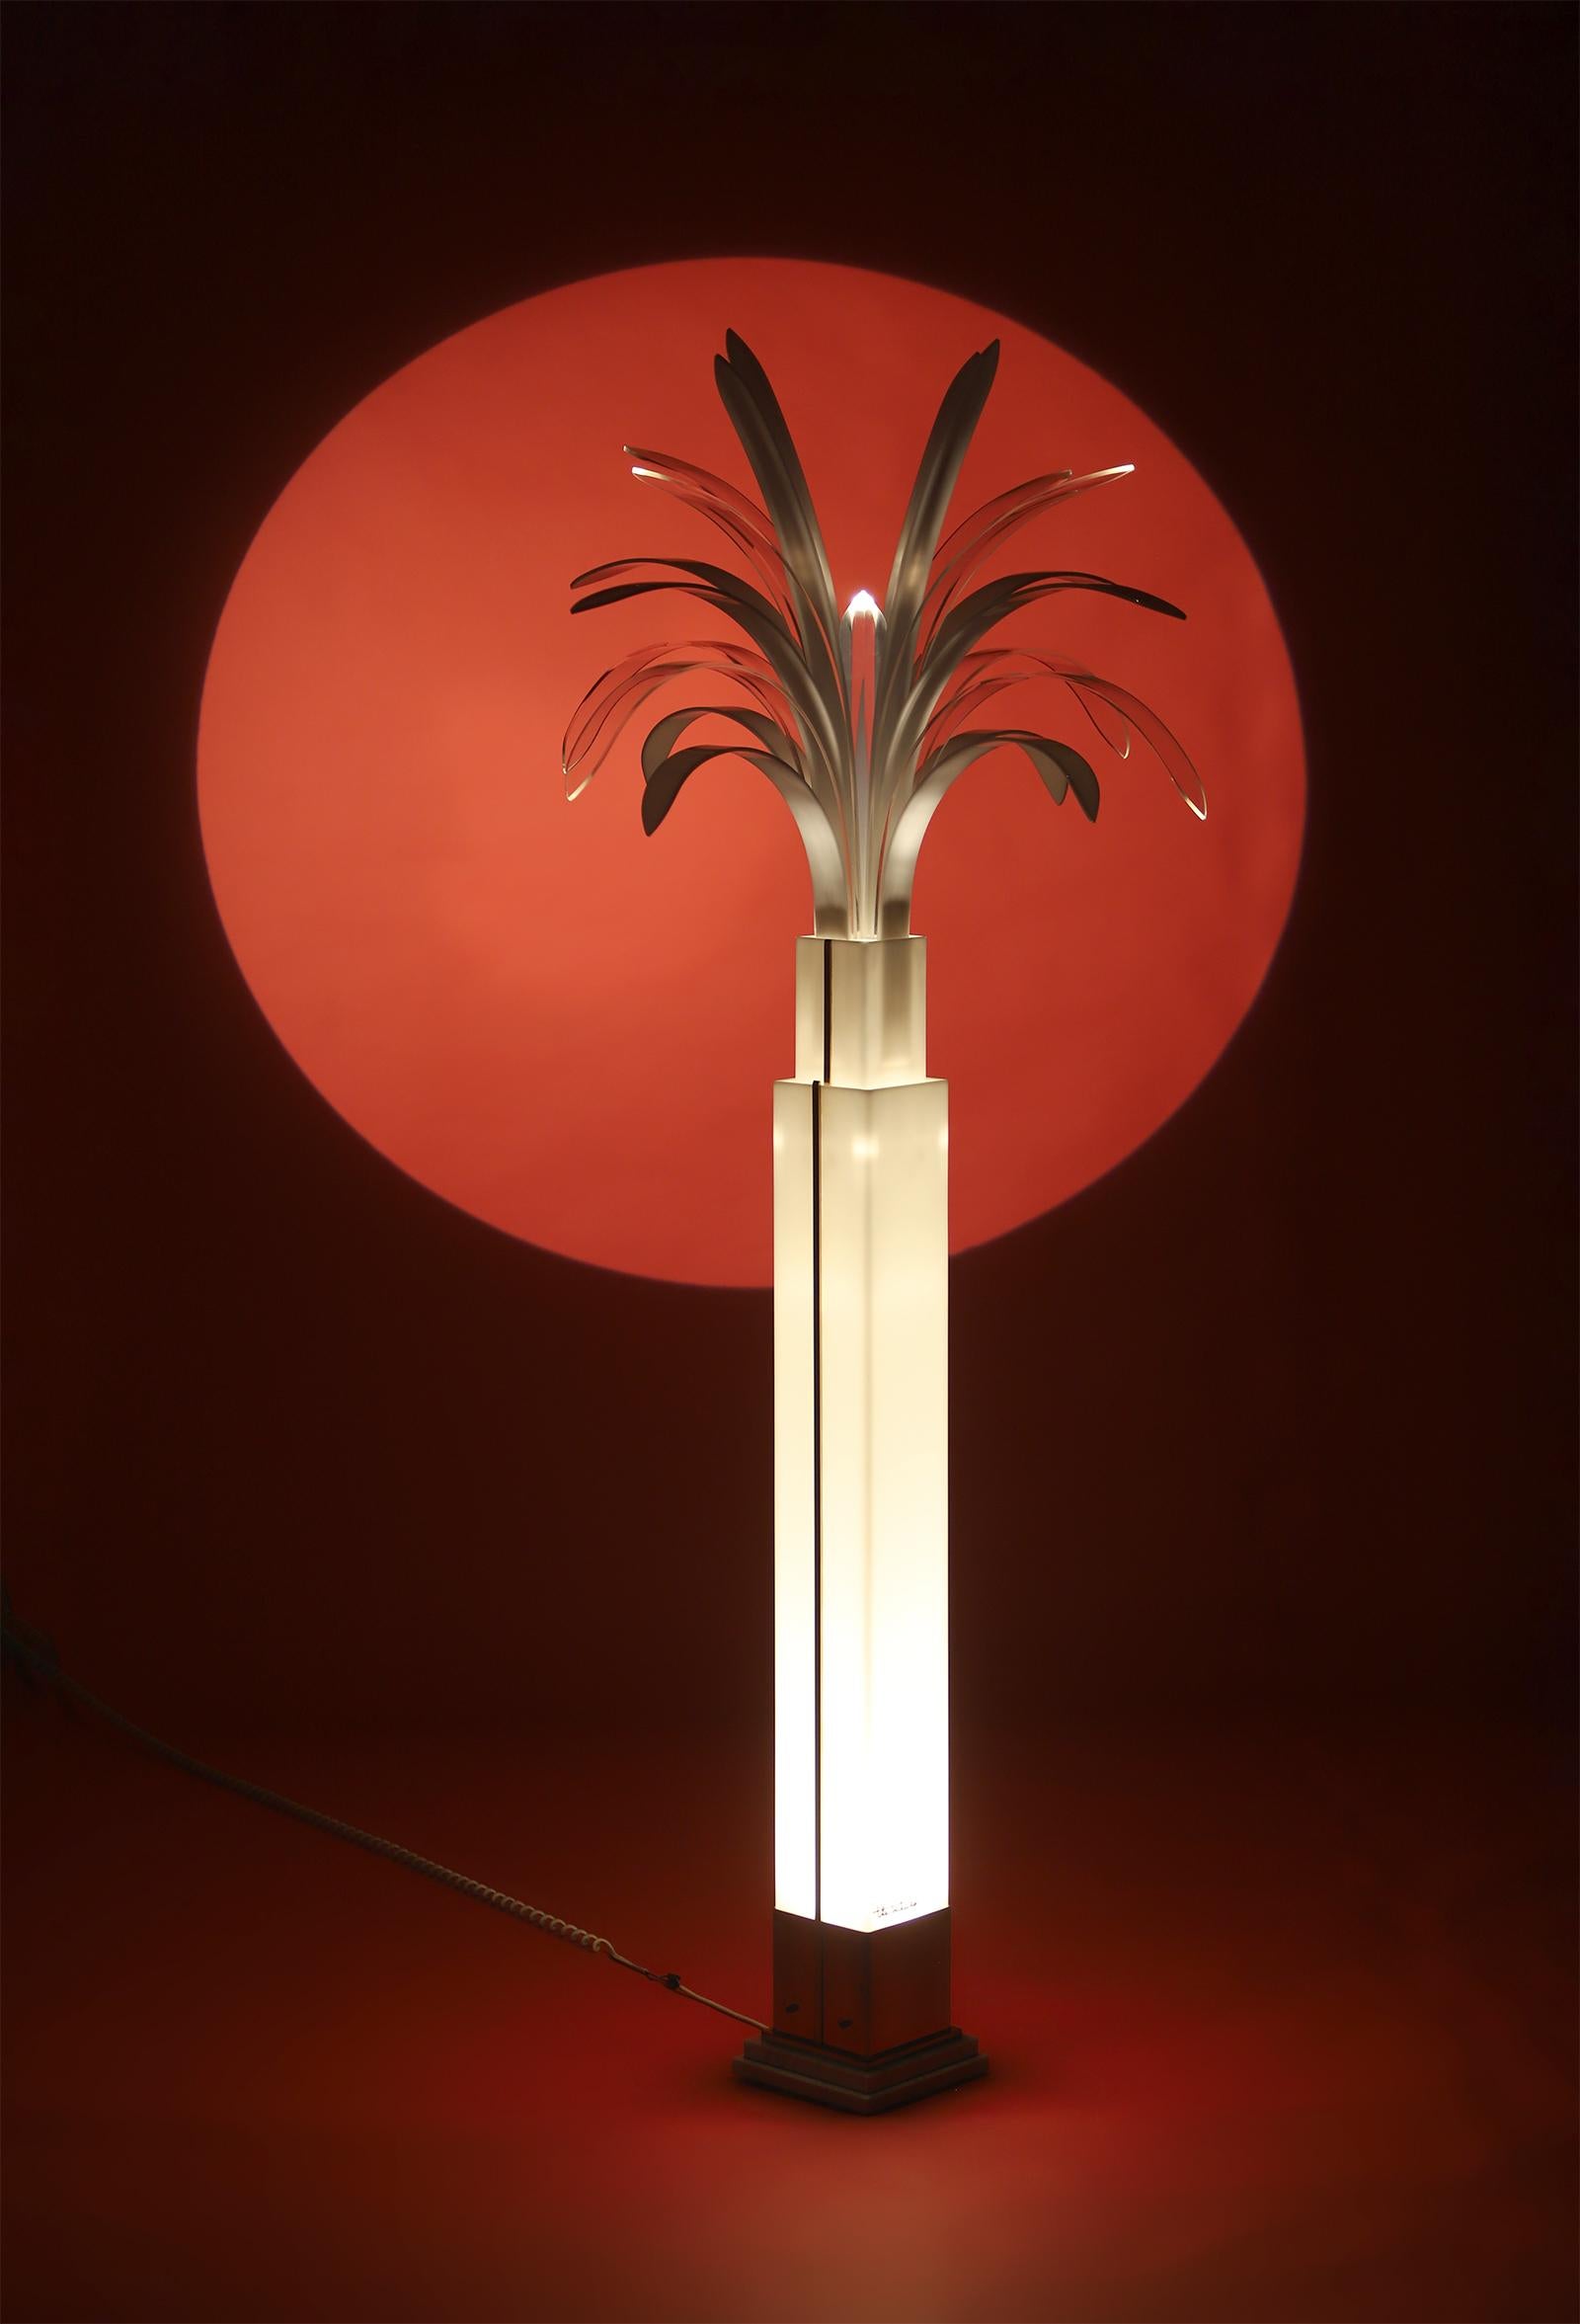 Rare perspex palm tree lamp by Belgian designer Theo Verhulst, dated 1982. This stunning lamp is fully made in white and transparent perspex, detailed with brass and resting on a marble base. When the lamp is switched on, the light shines through